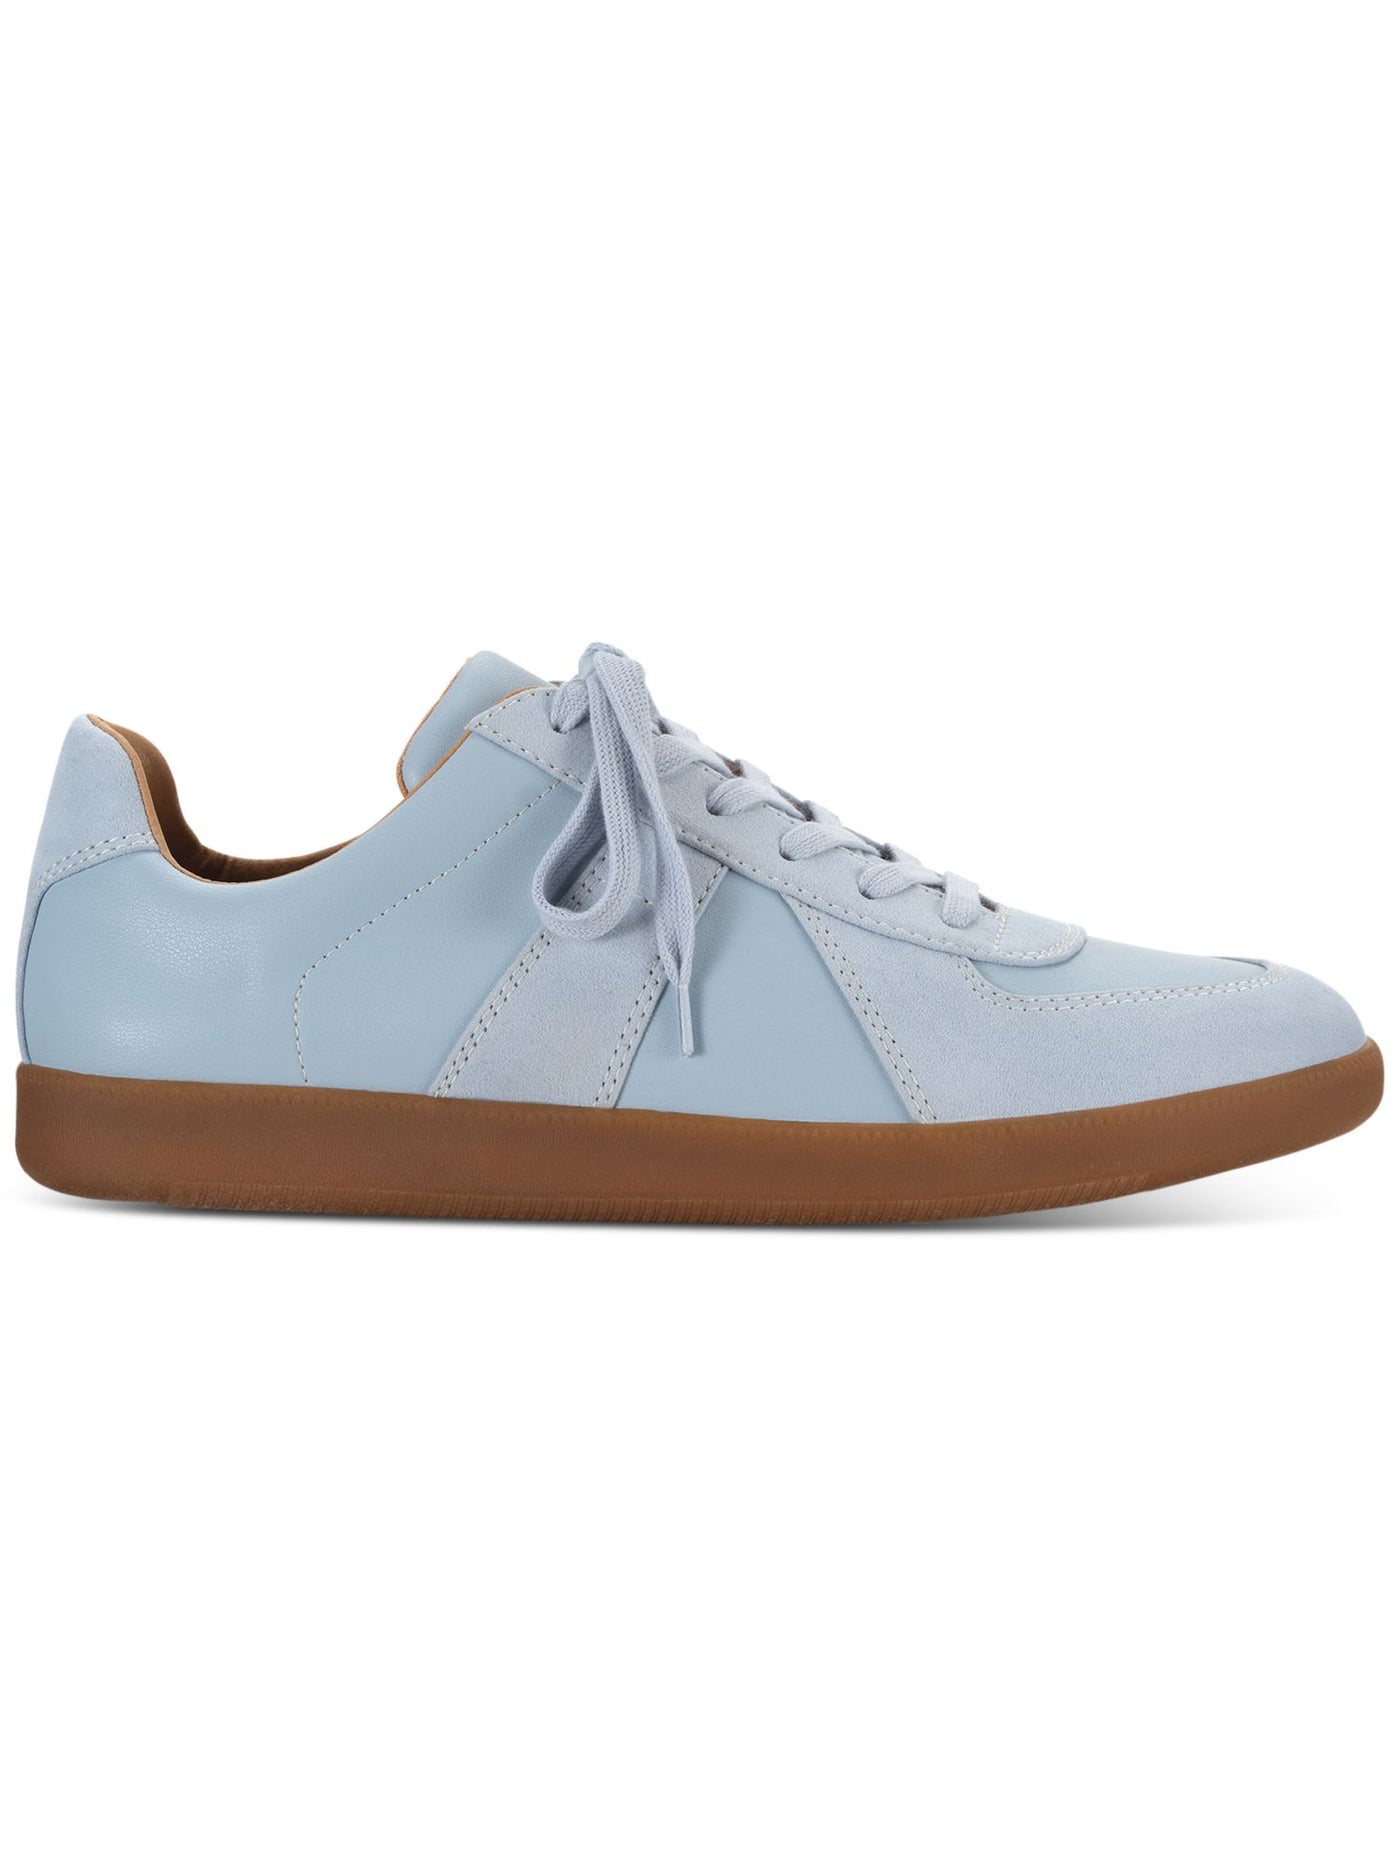 INC Mens Light Blue Padded Harlan Round Toe Platform Lace-Up Athletic Sneakers Shoes 10 M